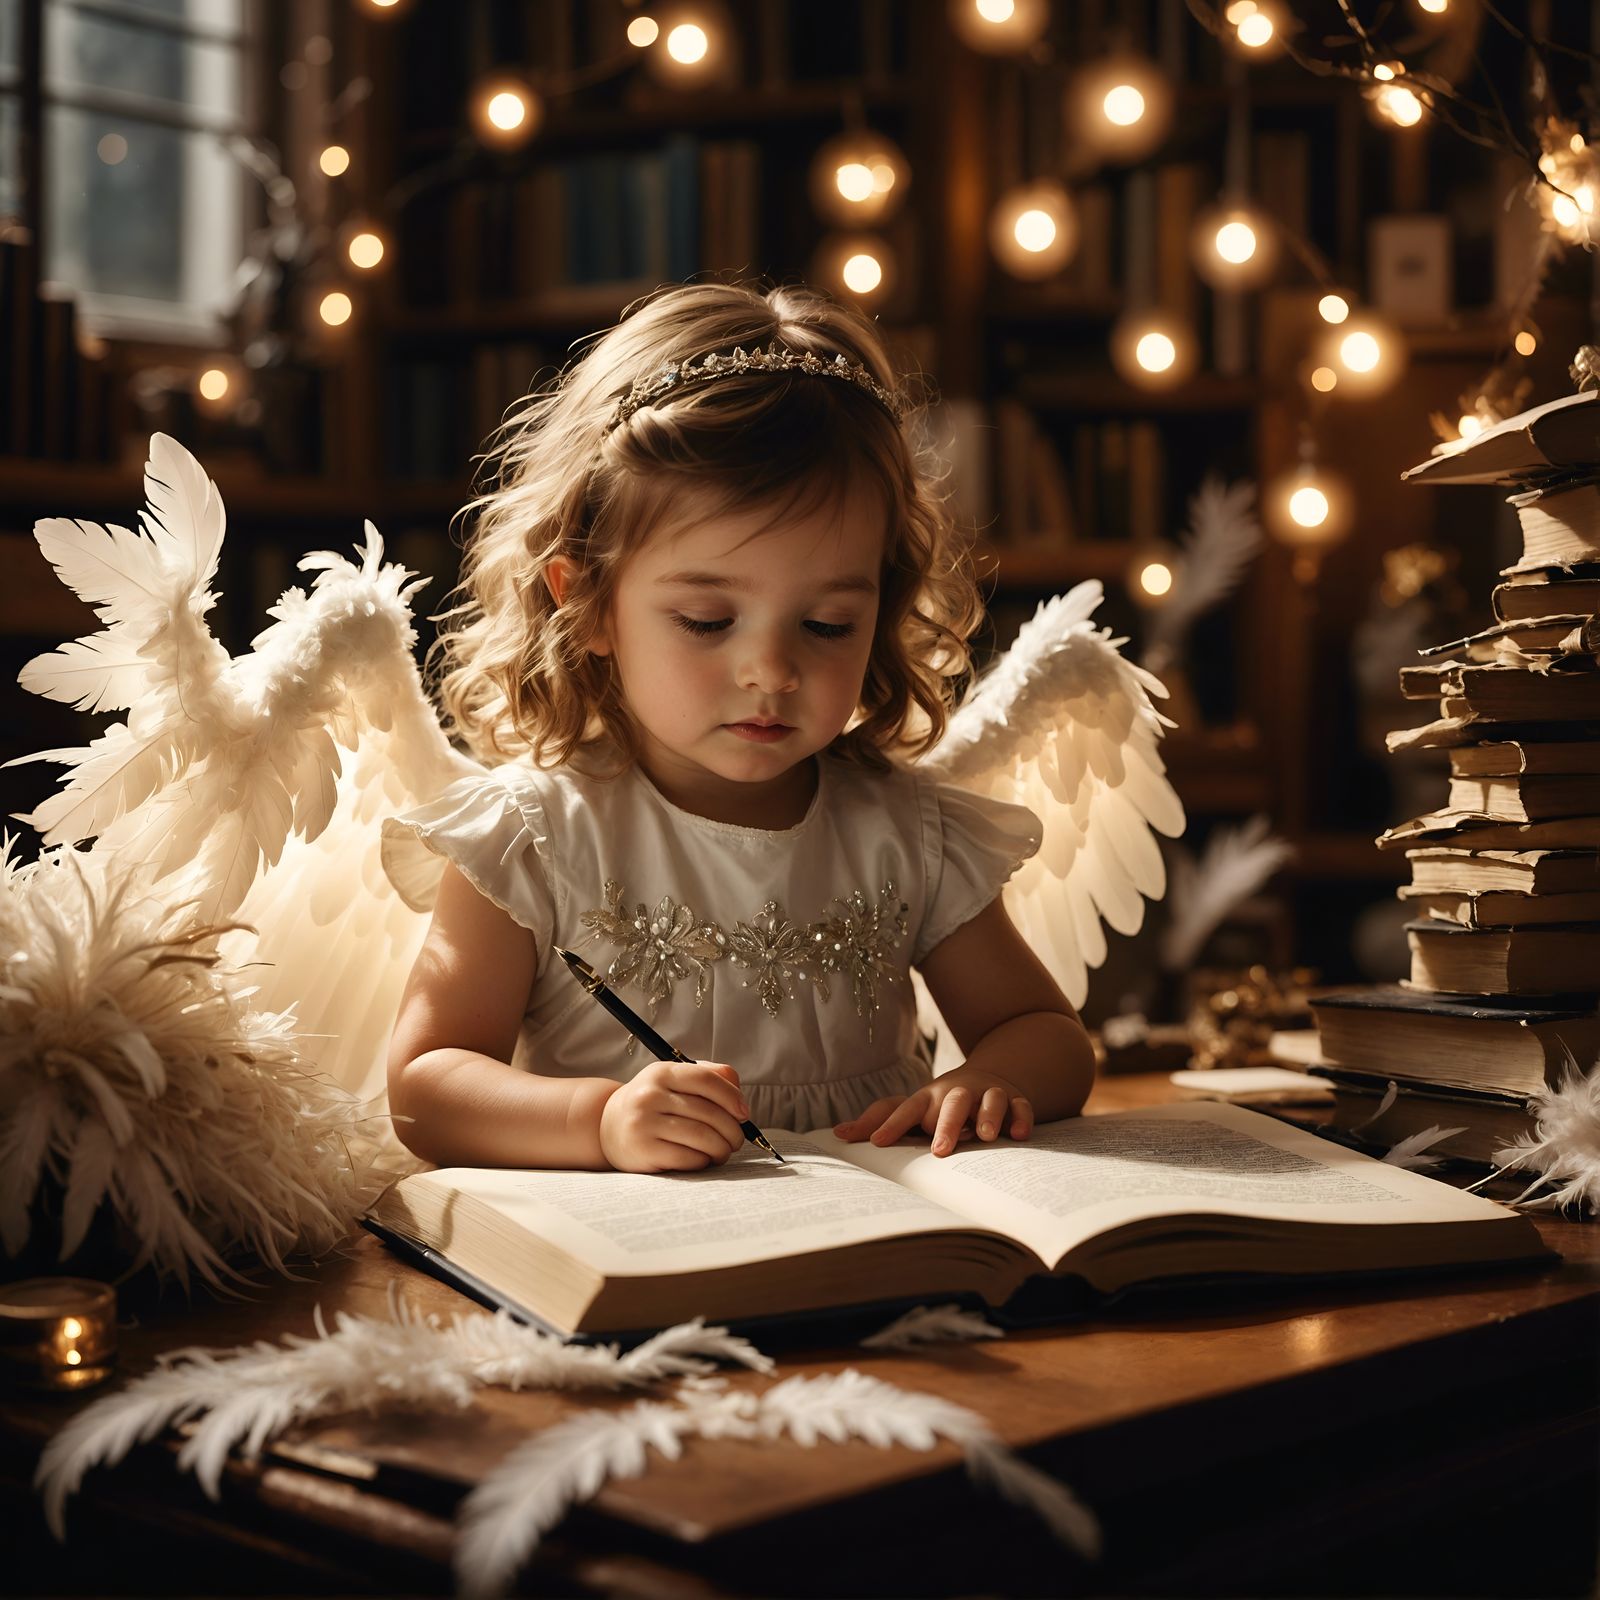 <lora:Art Prompt Share:1.0> The image shows a toddler girl dressed as an angel, surrounded by feathers and sitting at a cluttered desk in a...